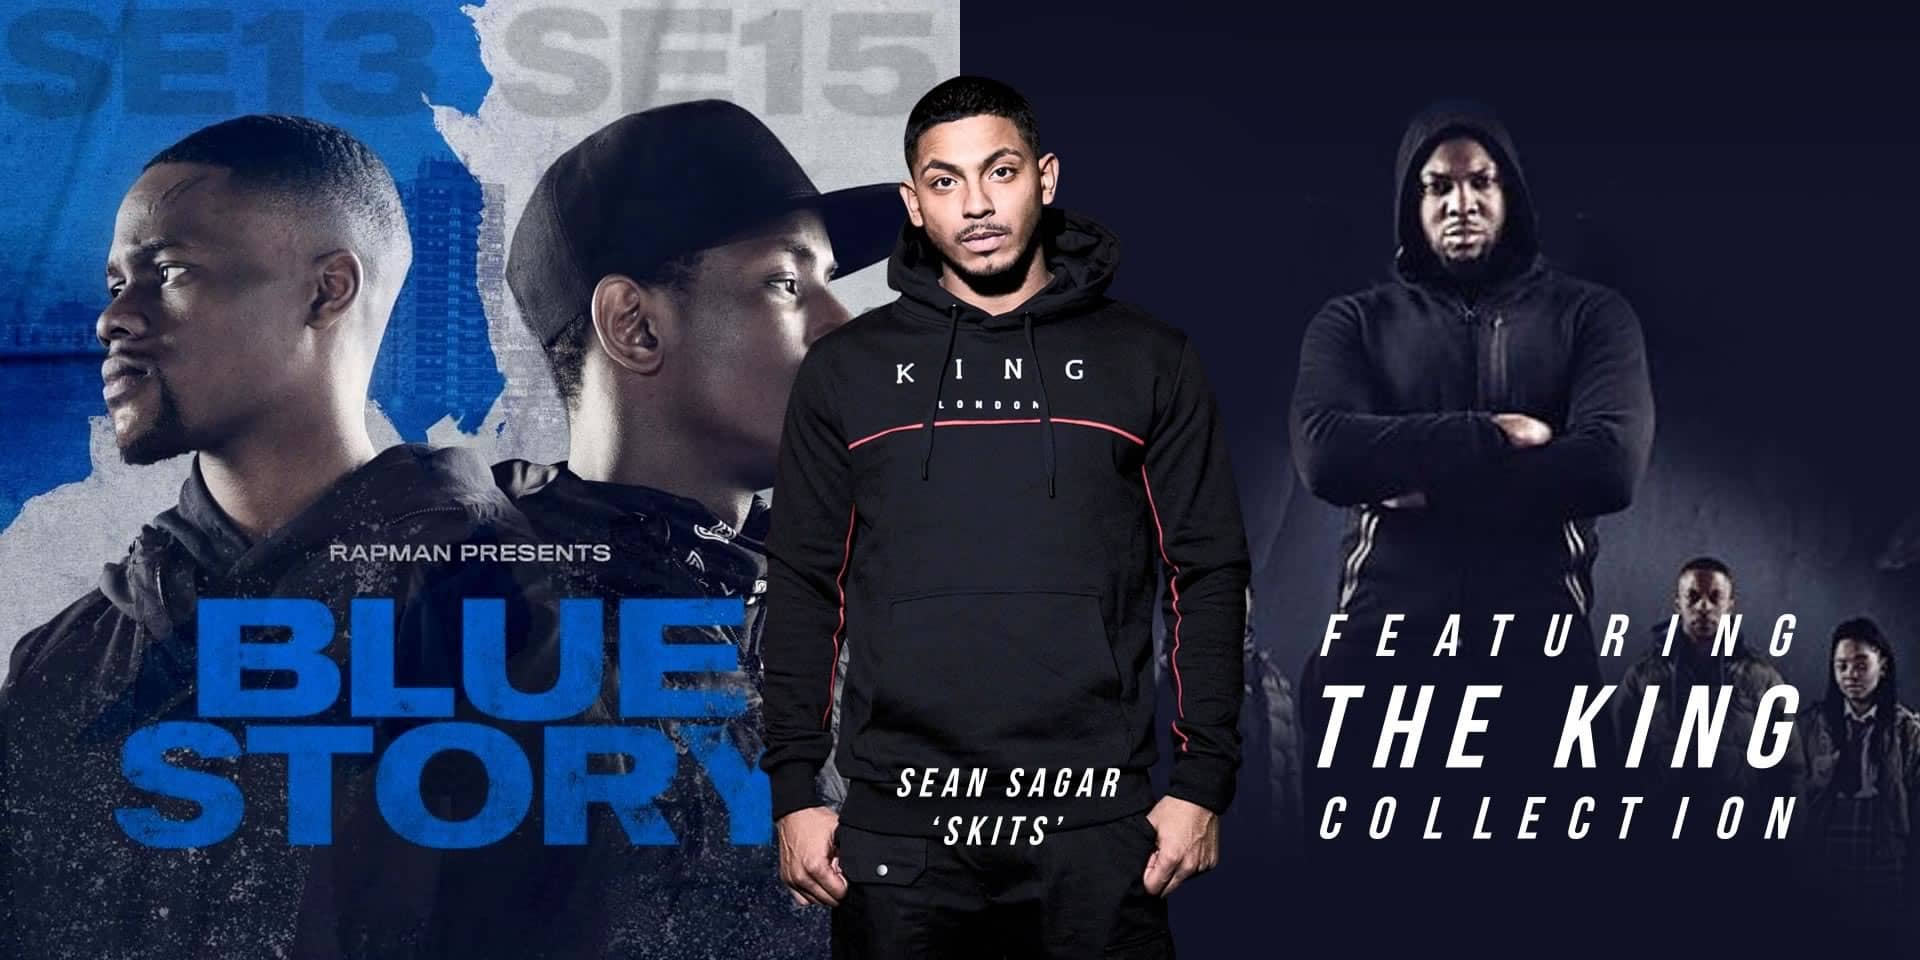 Blue Story Featuring THE KING Collection